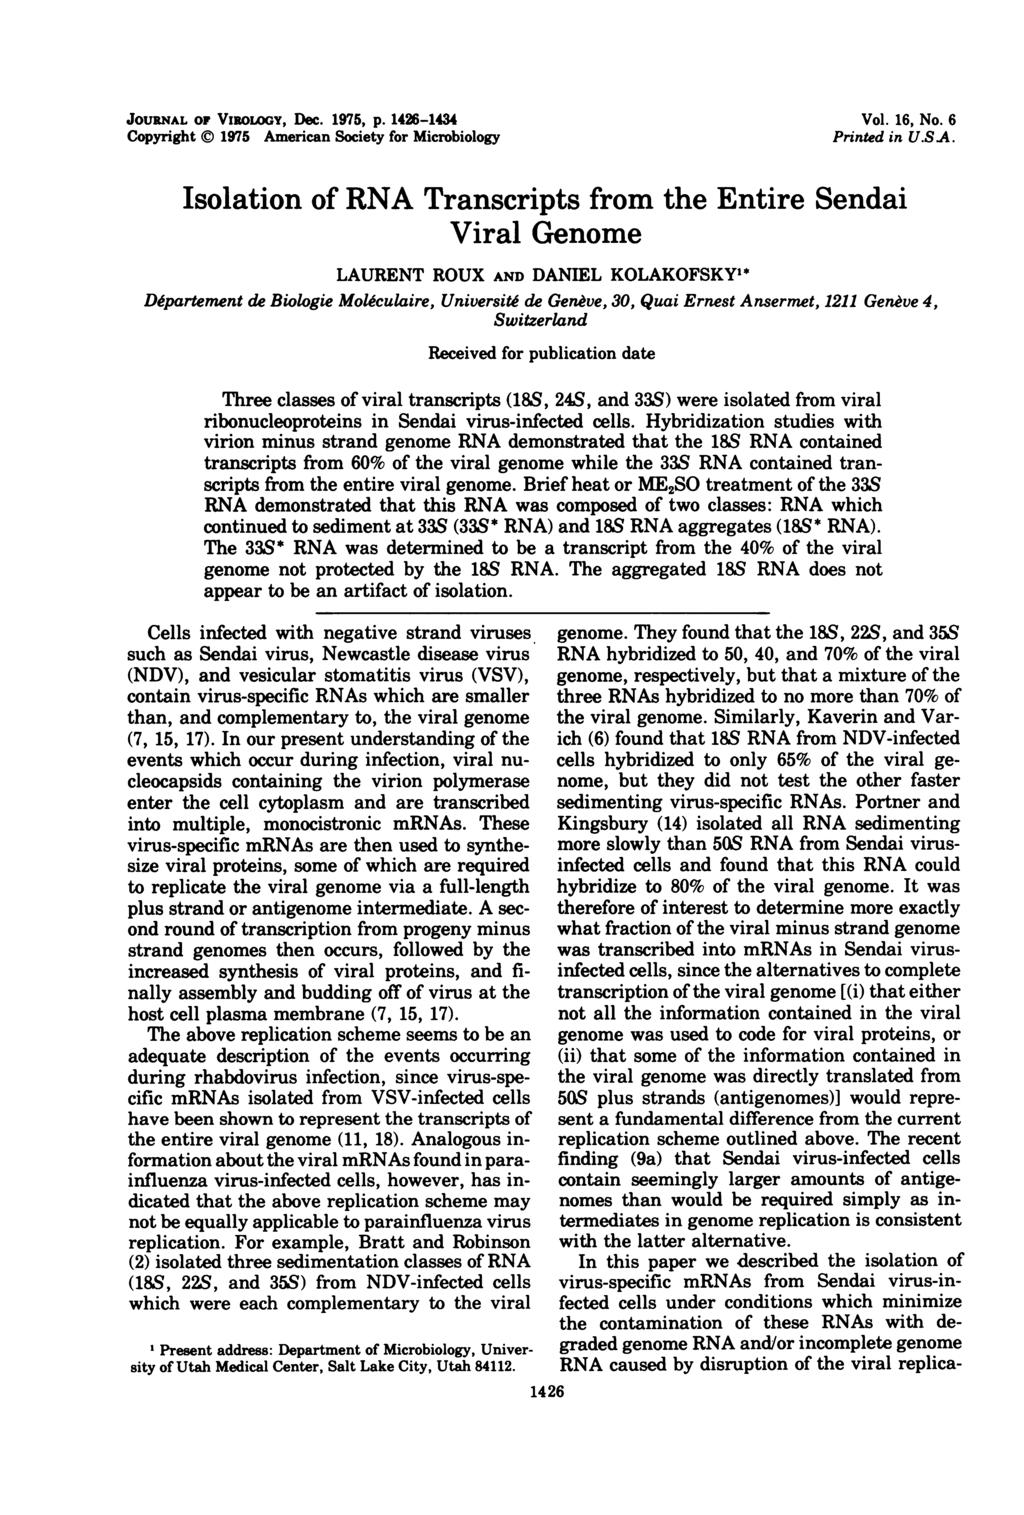 JOURNAL OF VioLoGY, Dec. 1975, p. 146-1434 Copyright ) 1975 American Society for Microbiology Vol. 16, No. 6 Printed in U.SA.